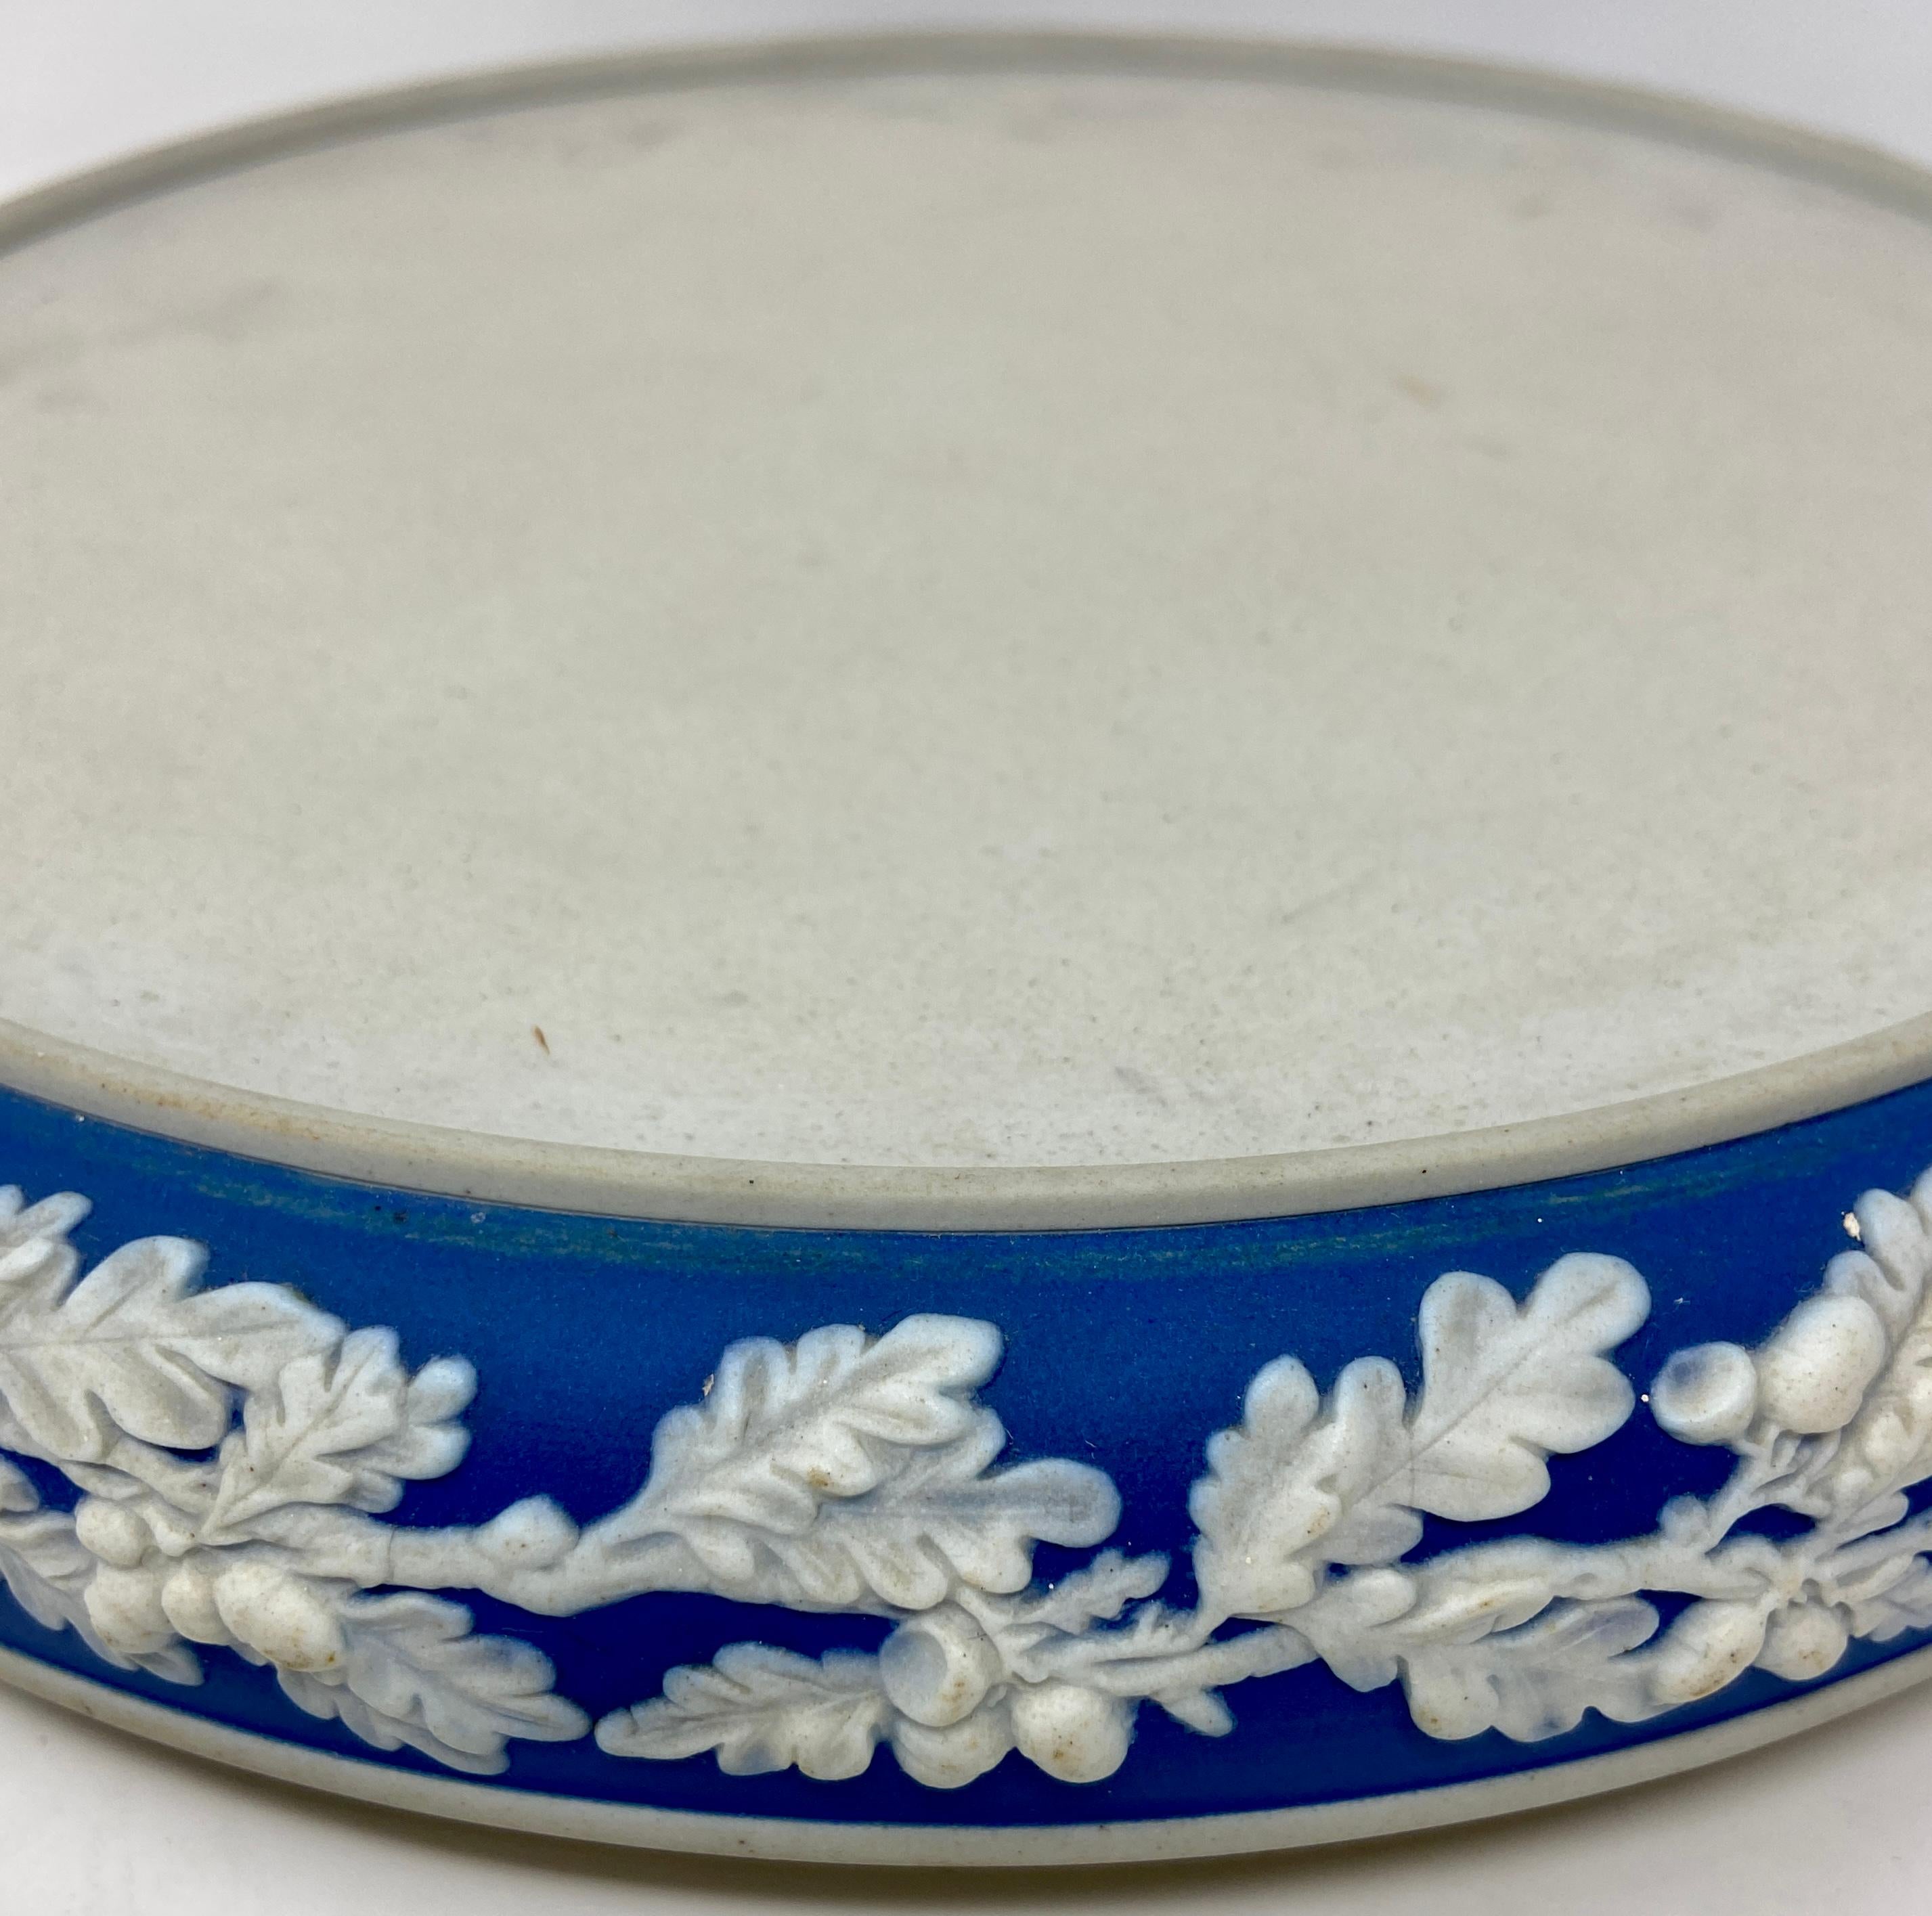 Antique English Porcelain Covered Cheese or Cake Dish, circa 1910-1915 1